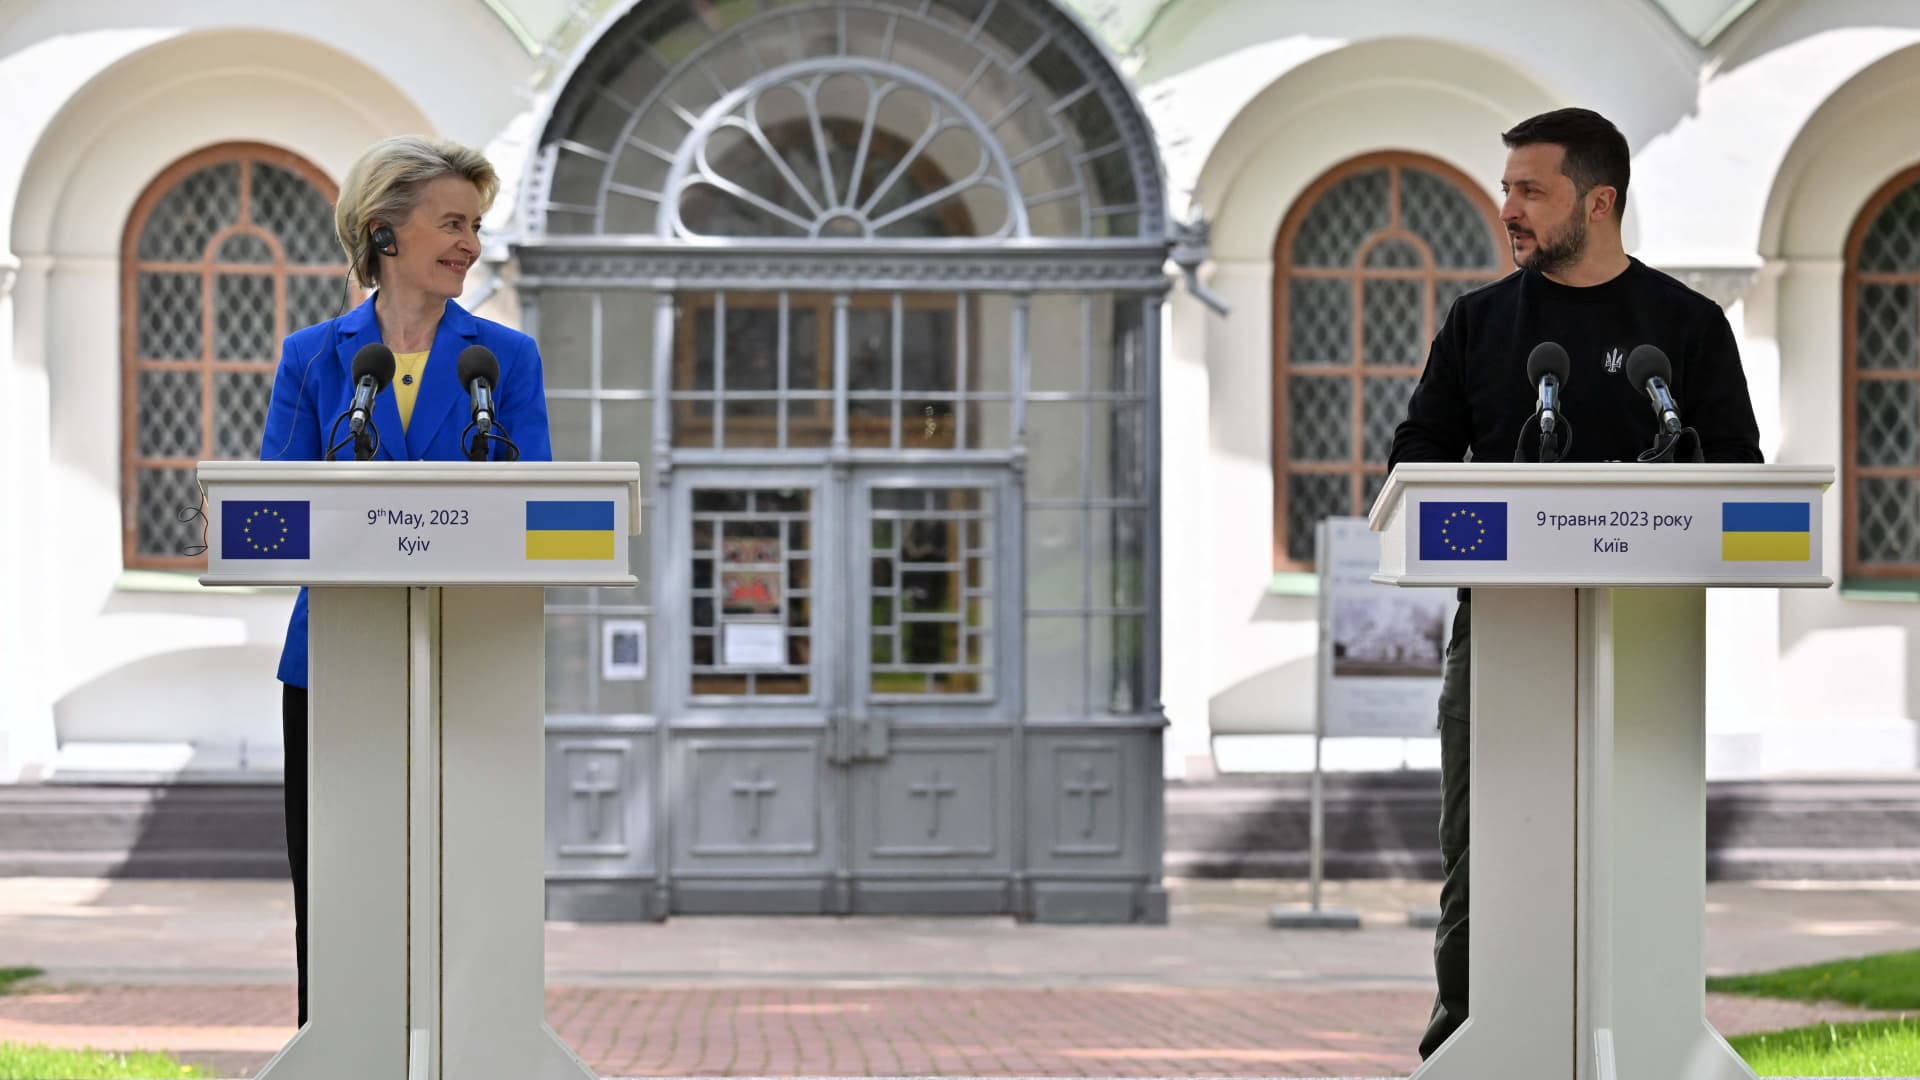 President of the European Commission Ursula von der Leyen (L) and Ukrainian President Volodymyr Zelensky (R) take part in a press conference in Kyiv on May 9, 2023. European Commission President Ursula von der Leyen arrived in Kiev on May 9, 2023, to mark Europe Day and show her support for Ukraine in the face of the Russian offensive, on the day Moscow commemorates the victory over Nazi Germany.